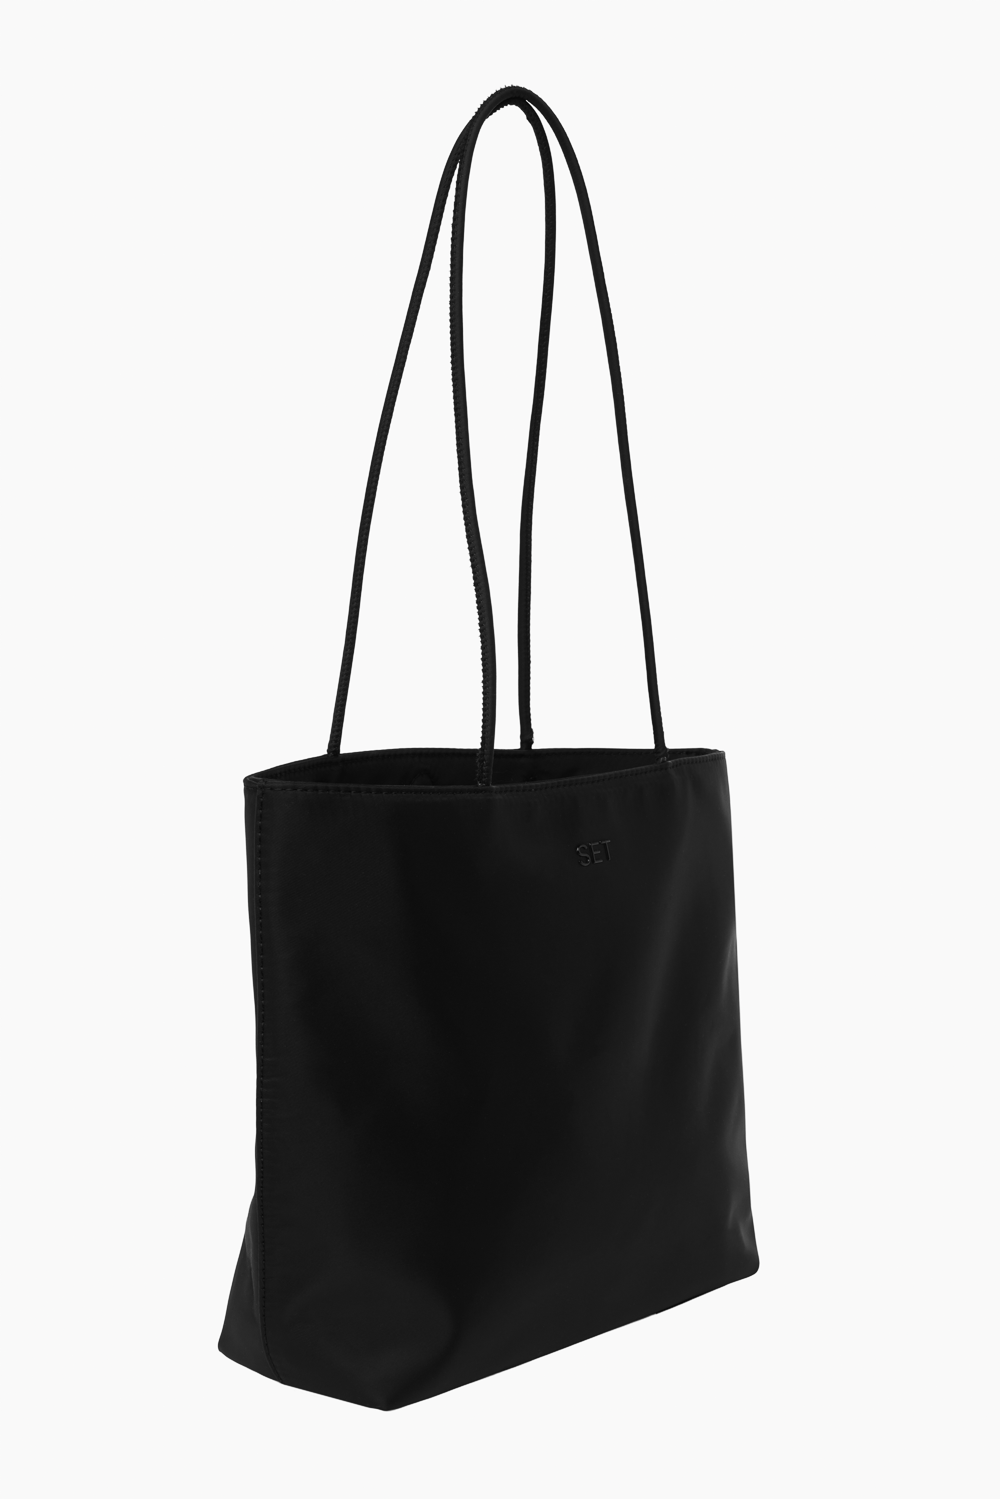 SET™ CITY TOTE IN ONYX